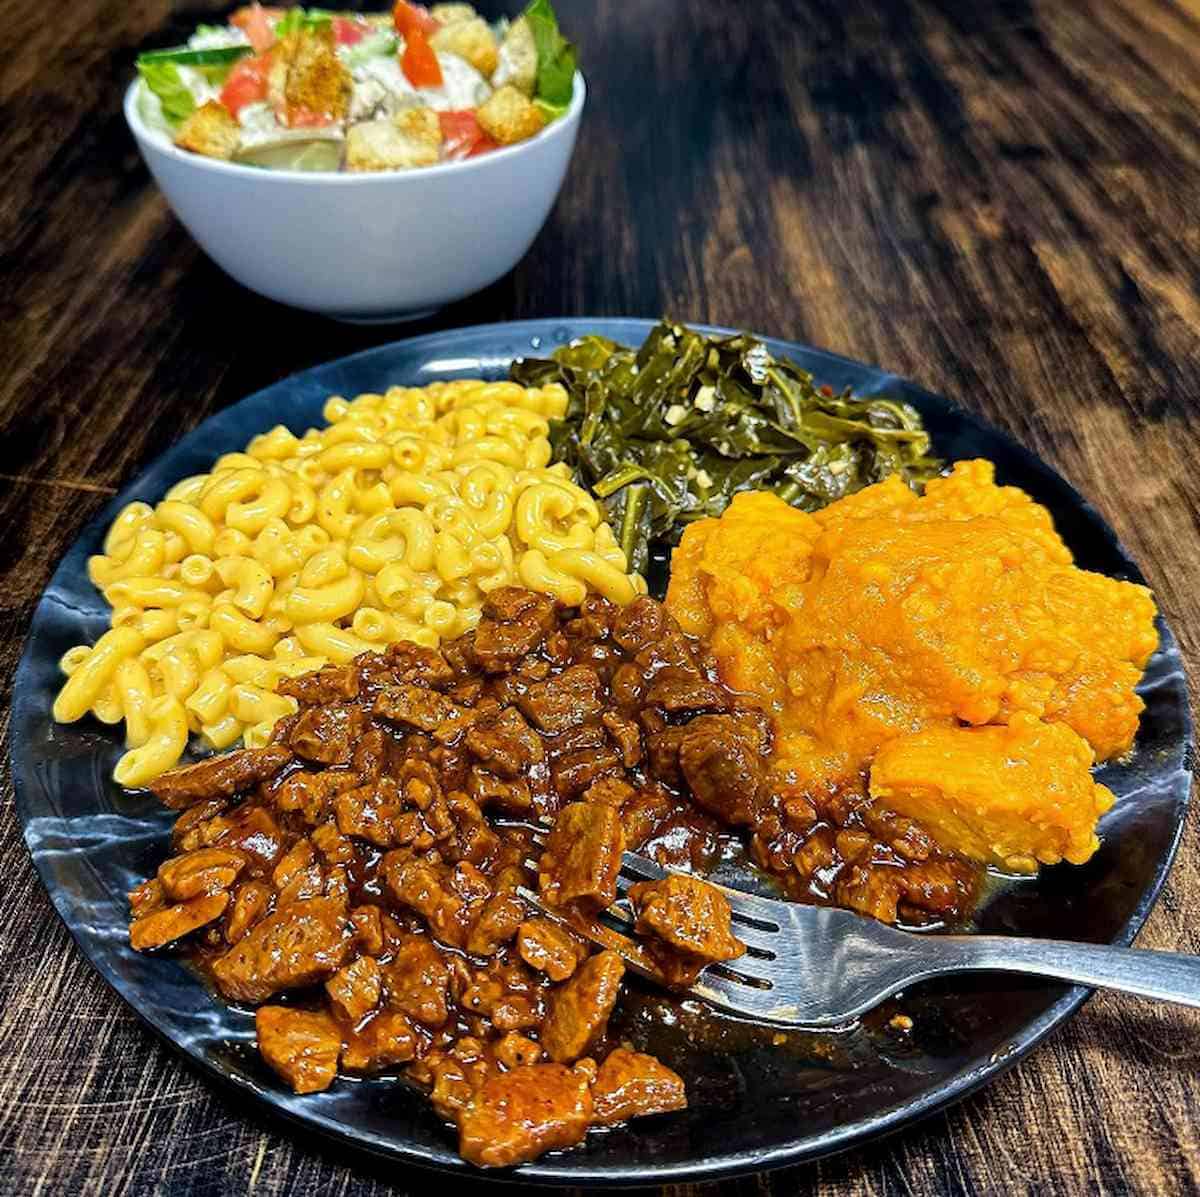 A vegan Southern plate including BBQ TVP, Mac & Cheese, collard greens and candied yams.